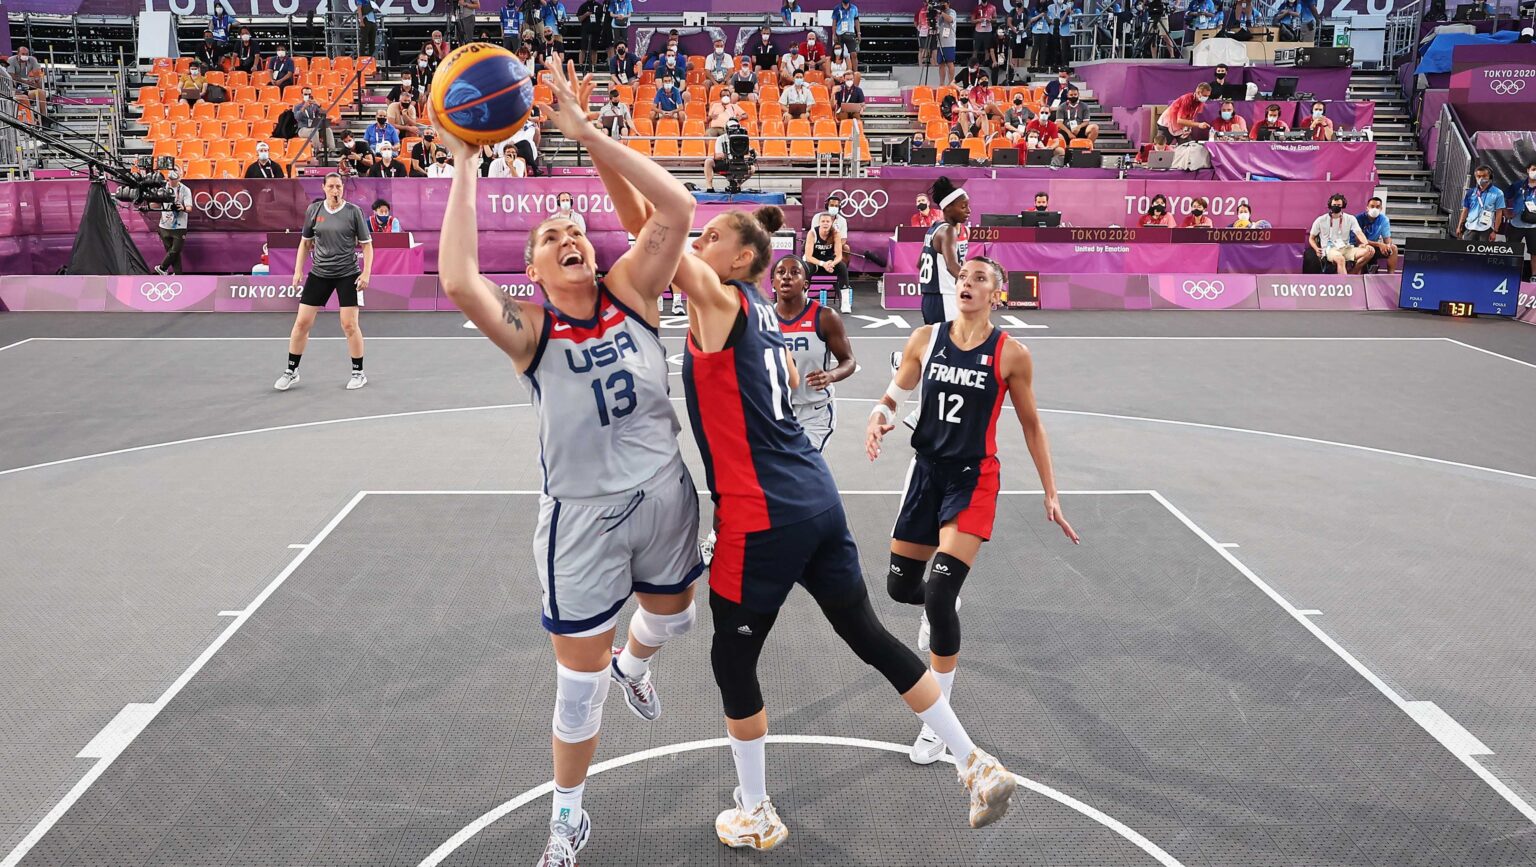 Olympic Basketball 3x3 basketball goes from street to Olympic appearance